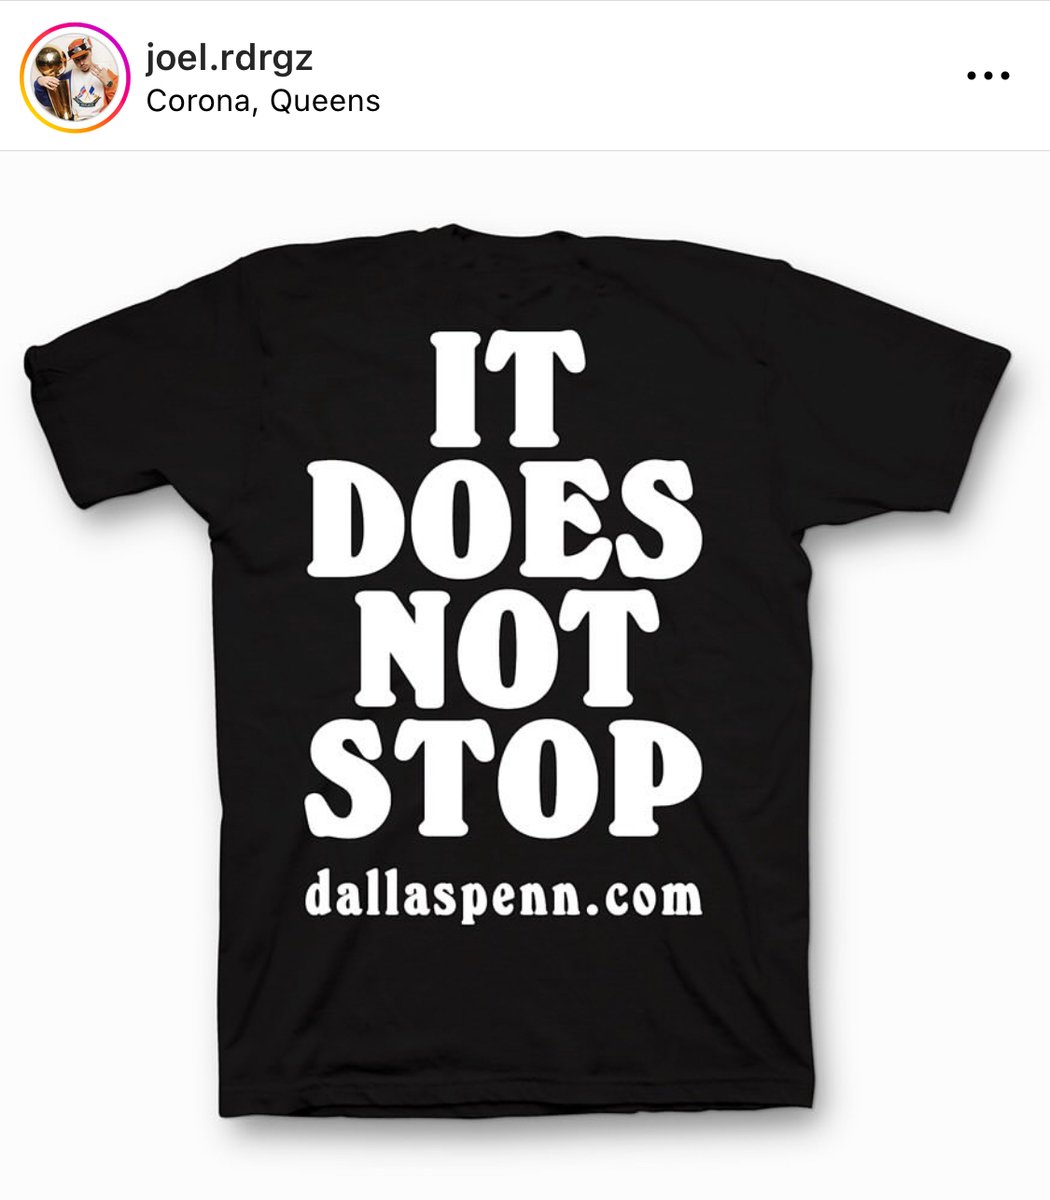 #INTERNETS: 100% of profits from The Dallas Penn Timberland shirt are going to Dallas's wife. She approved! Can we​ ​run it up​ together? ​Buy it at dallaspennforever.com